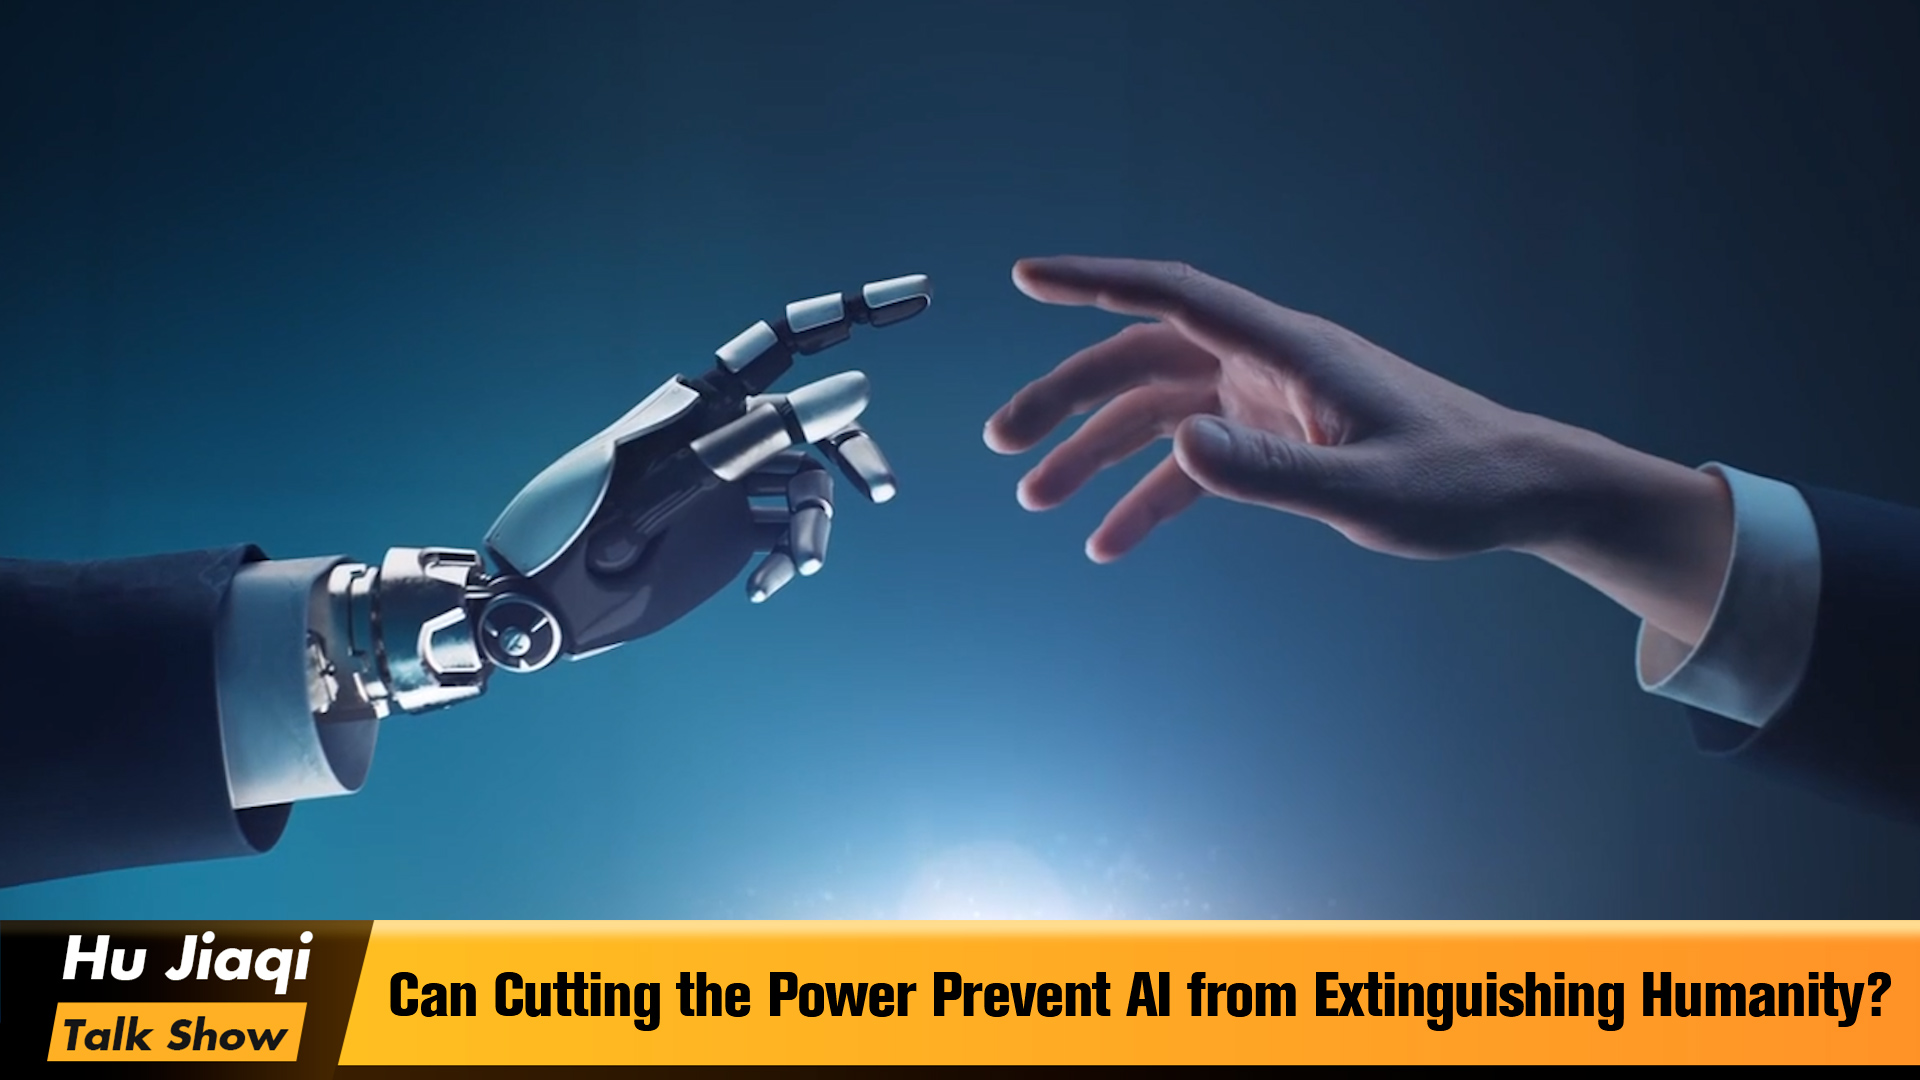 Can Cutting the Power Prevent AI from Extinguishing Humanity?